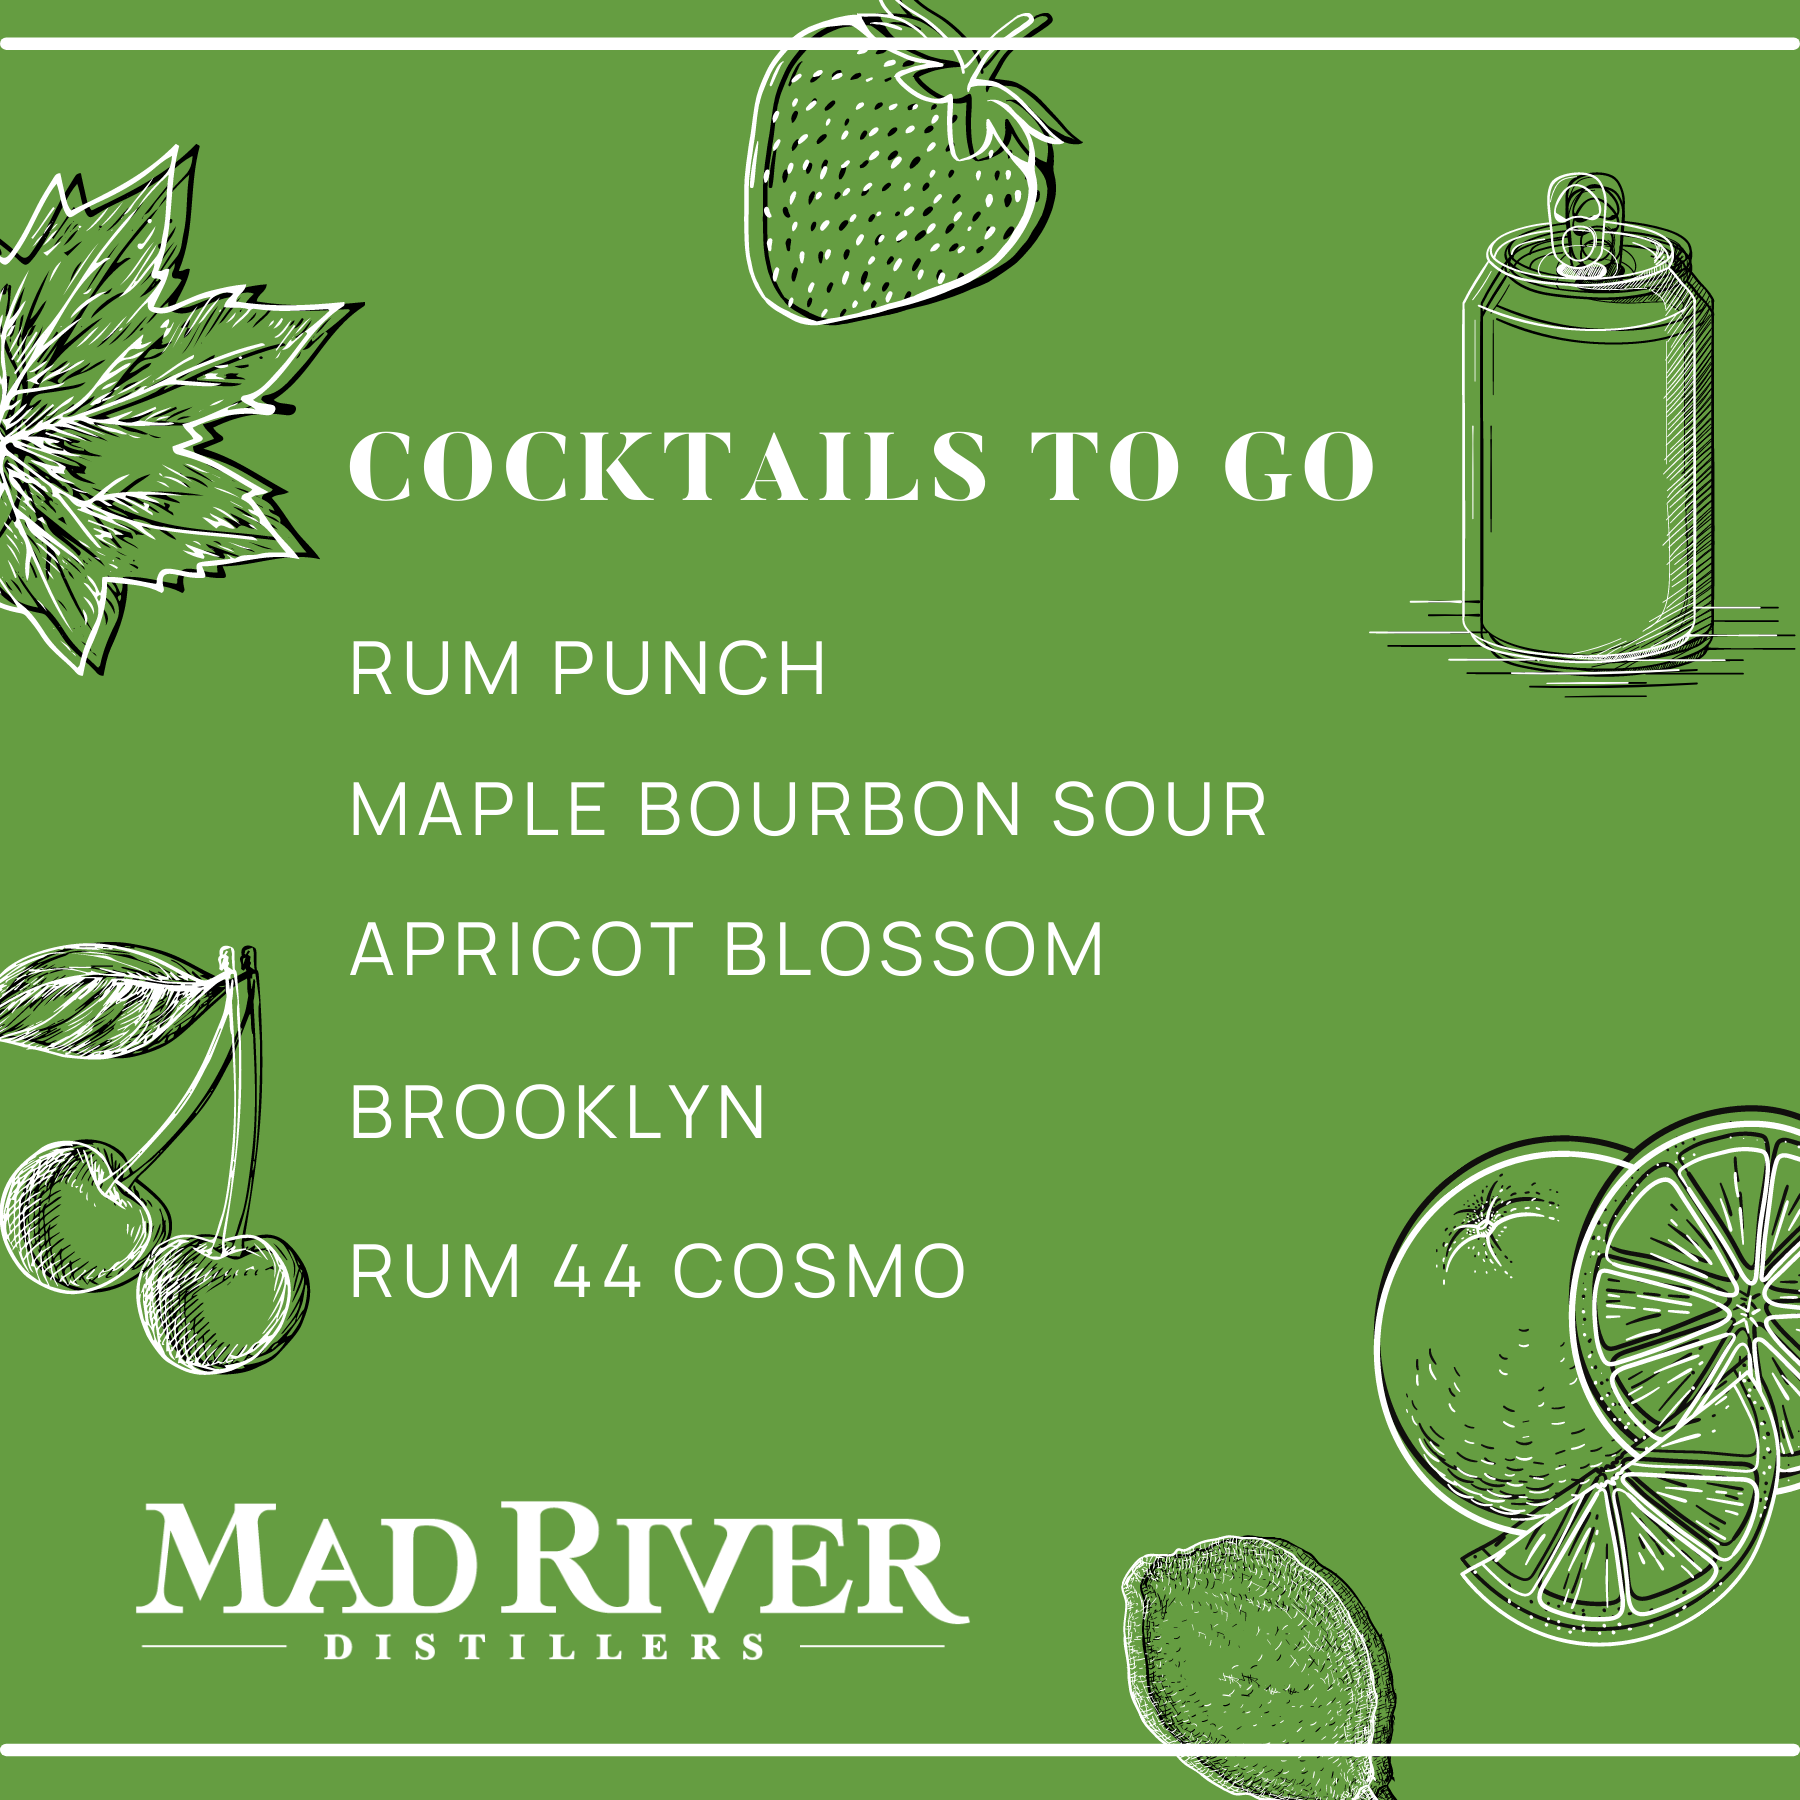 Canned cocktails to go menu: Rum Punch, Maple Bourbon Sour, Apricot Blossom, Brooklyn, Rum 44 Cosmo